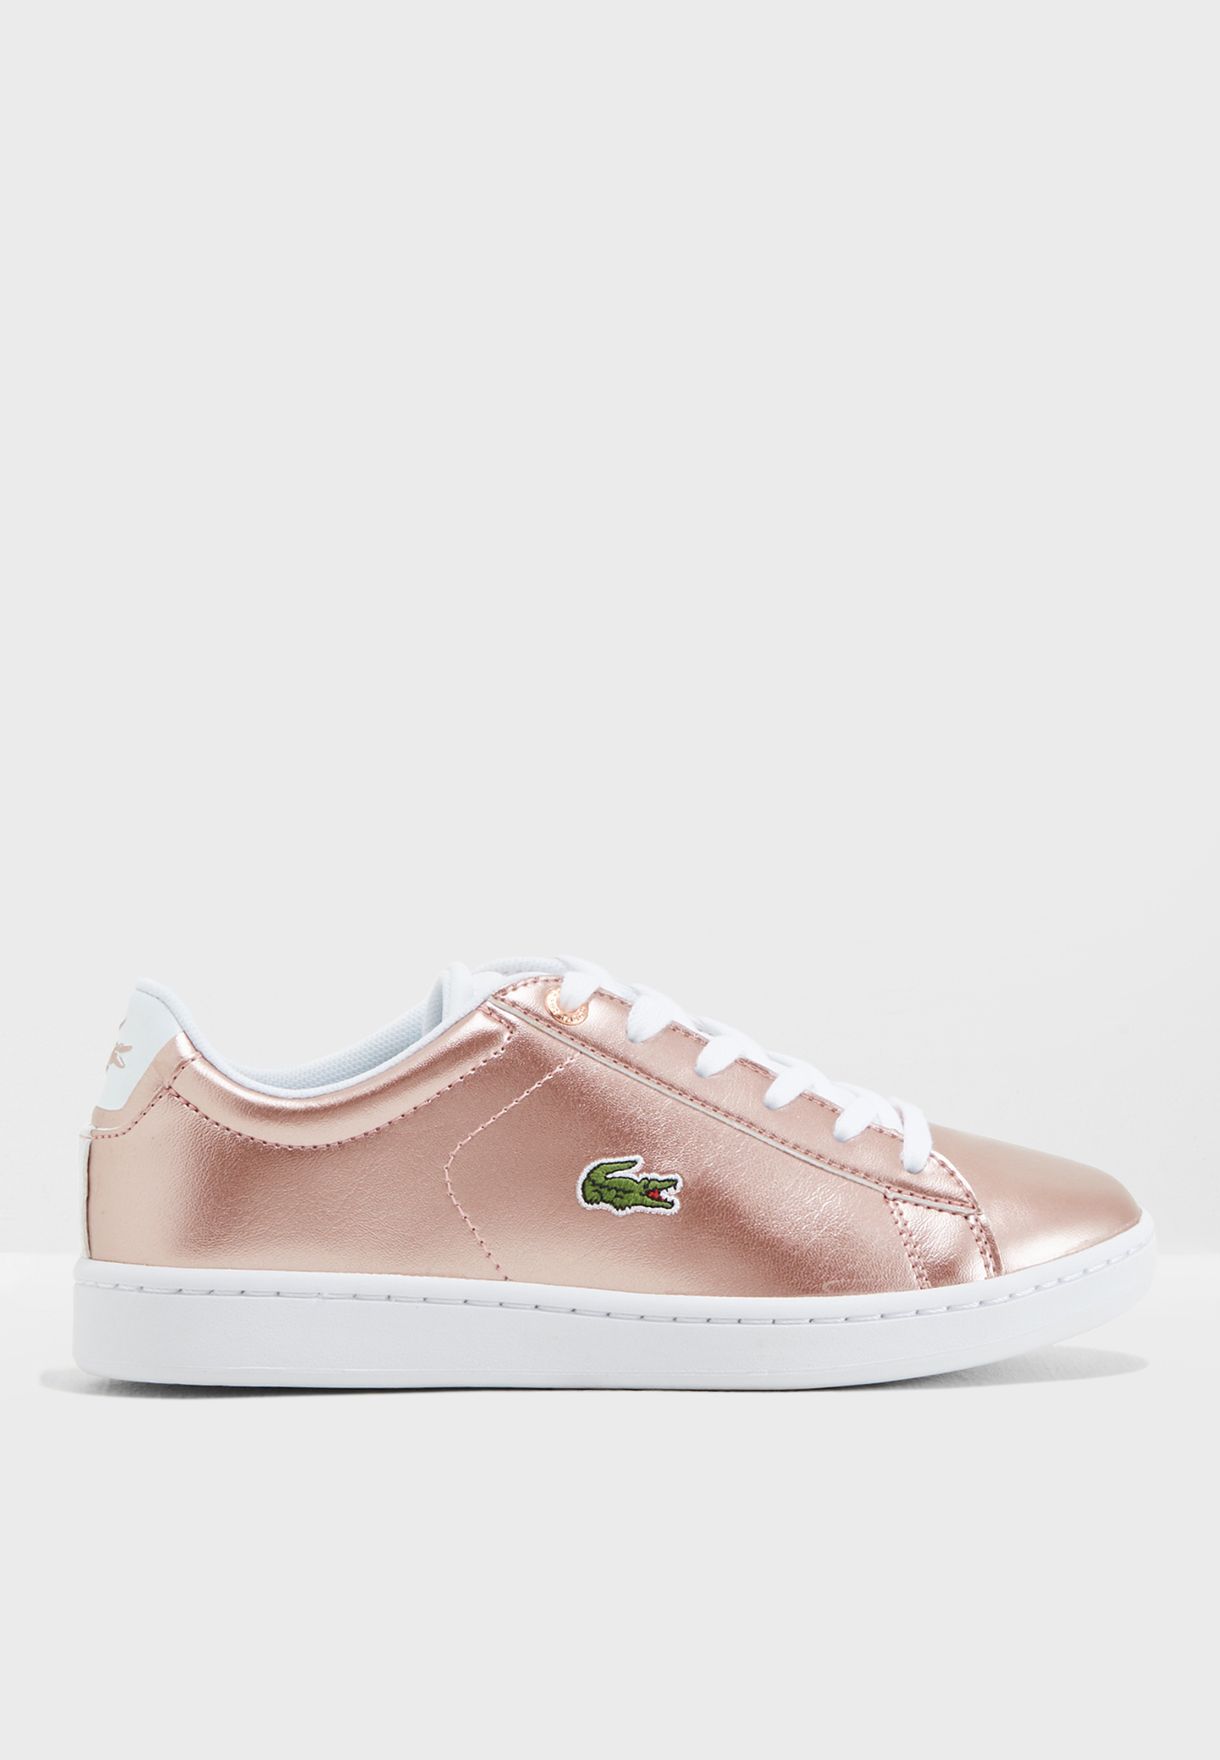 lacoste sneakers rose gold